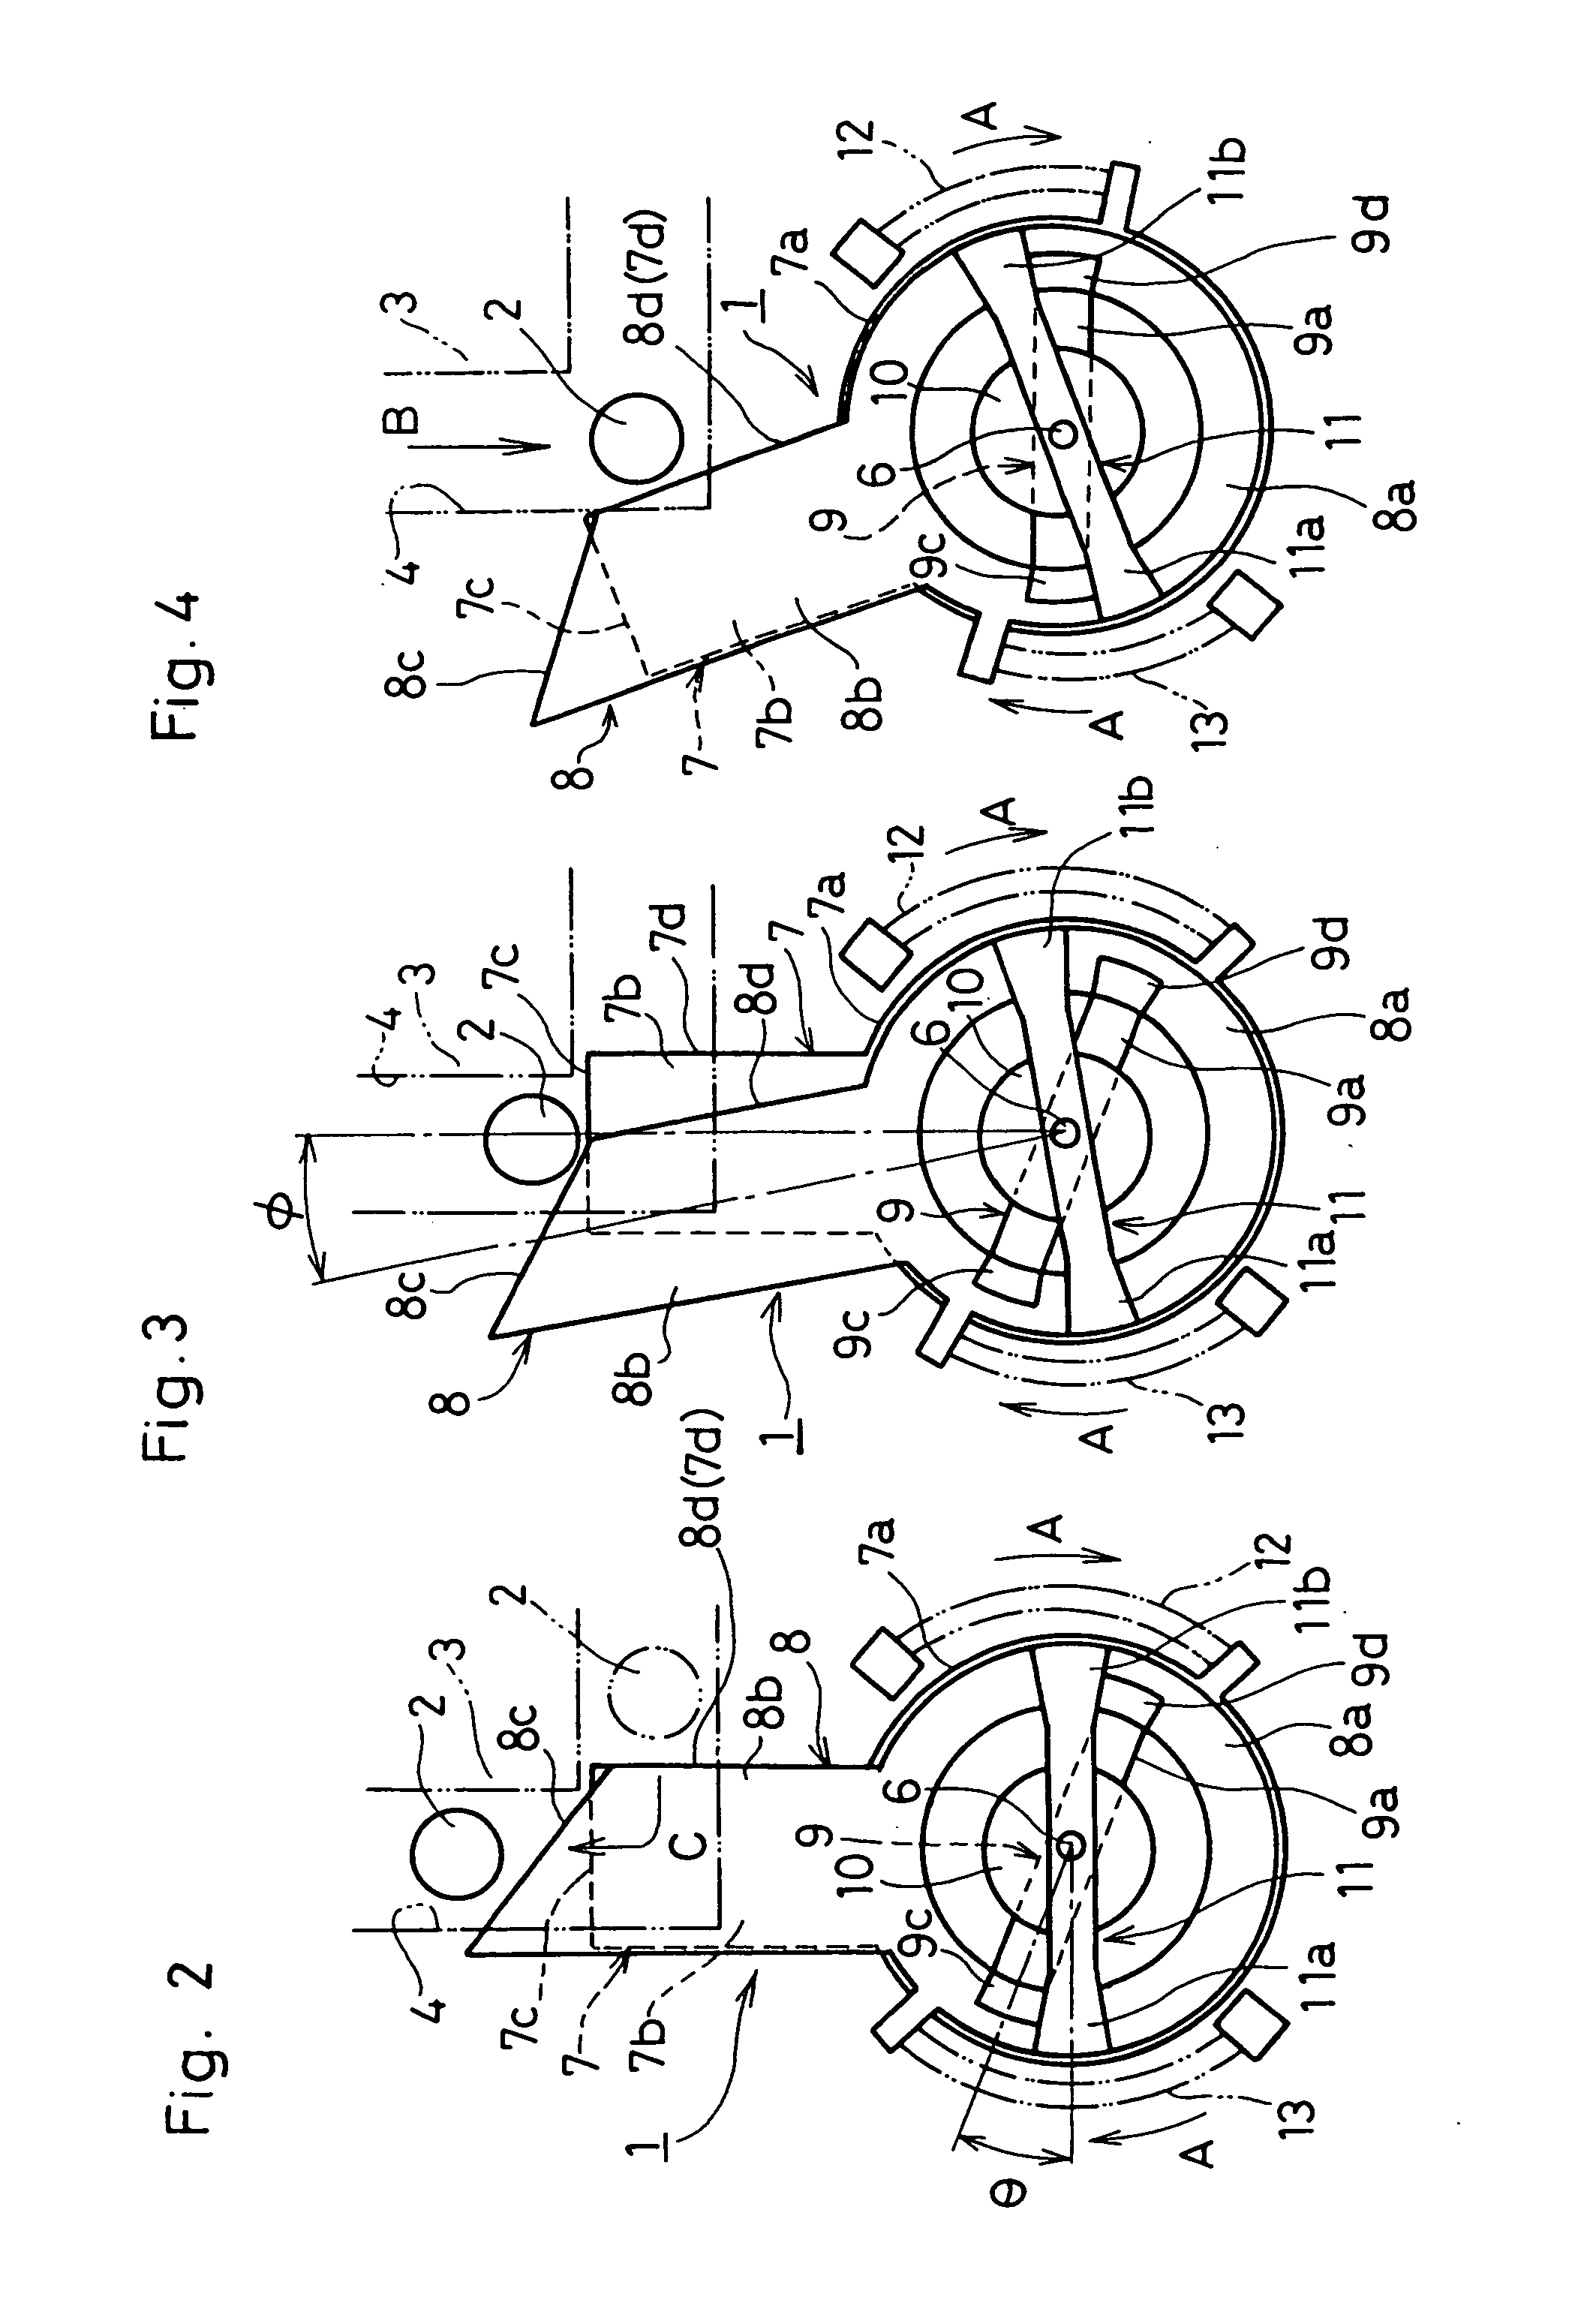 Shift lever lock device for vehicular automatic transmission